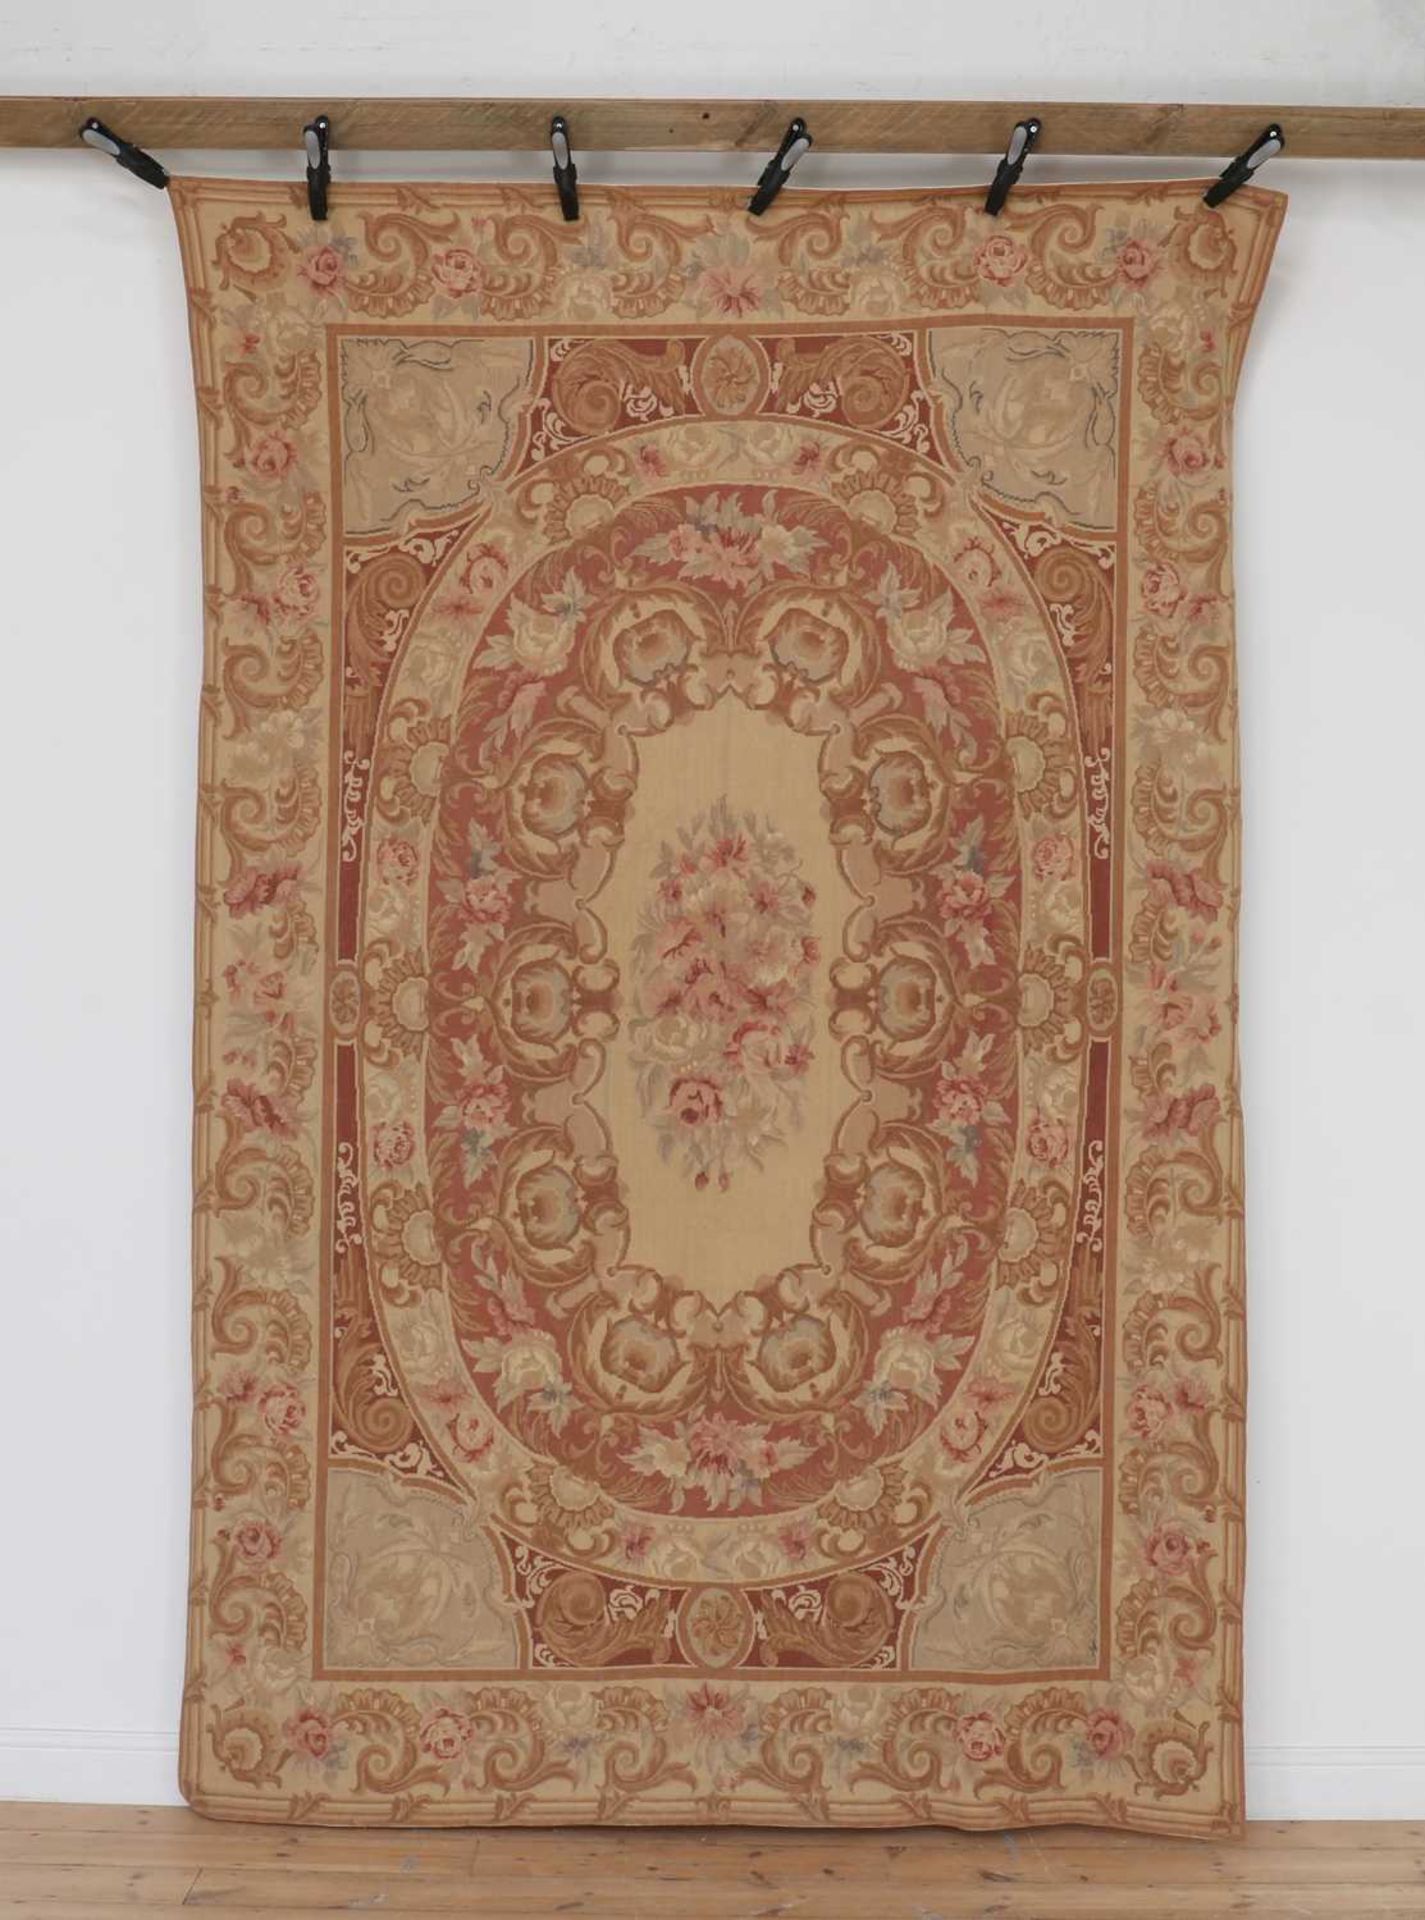 An Aubusson-style wool rug,